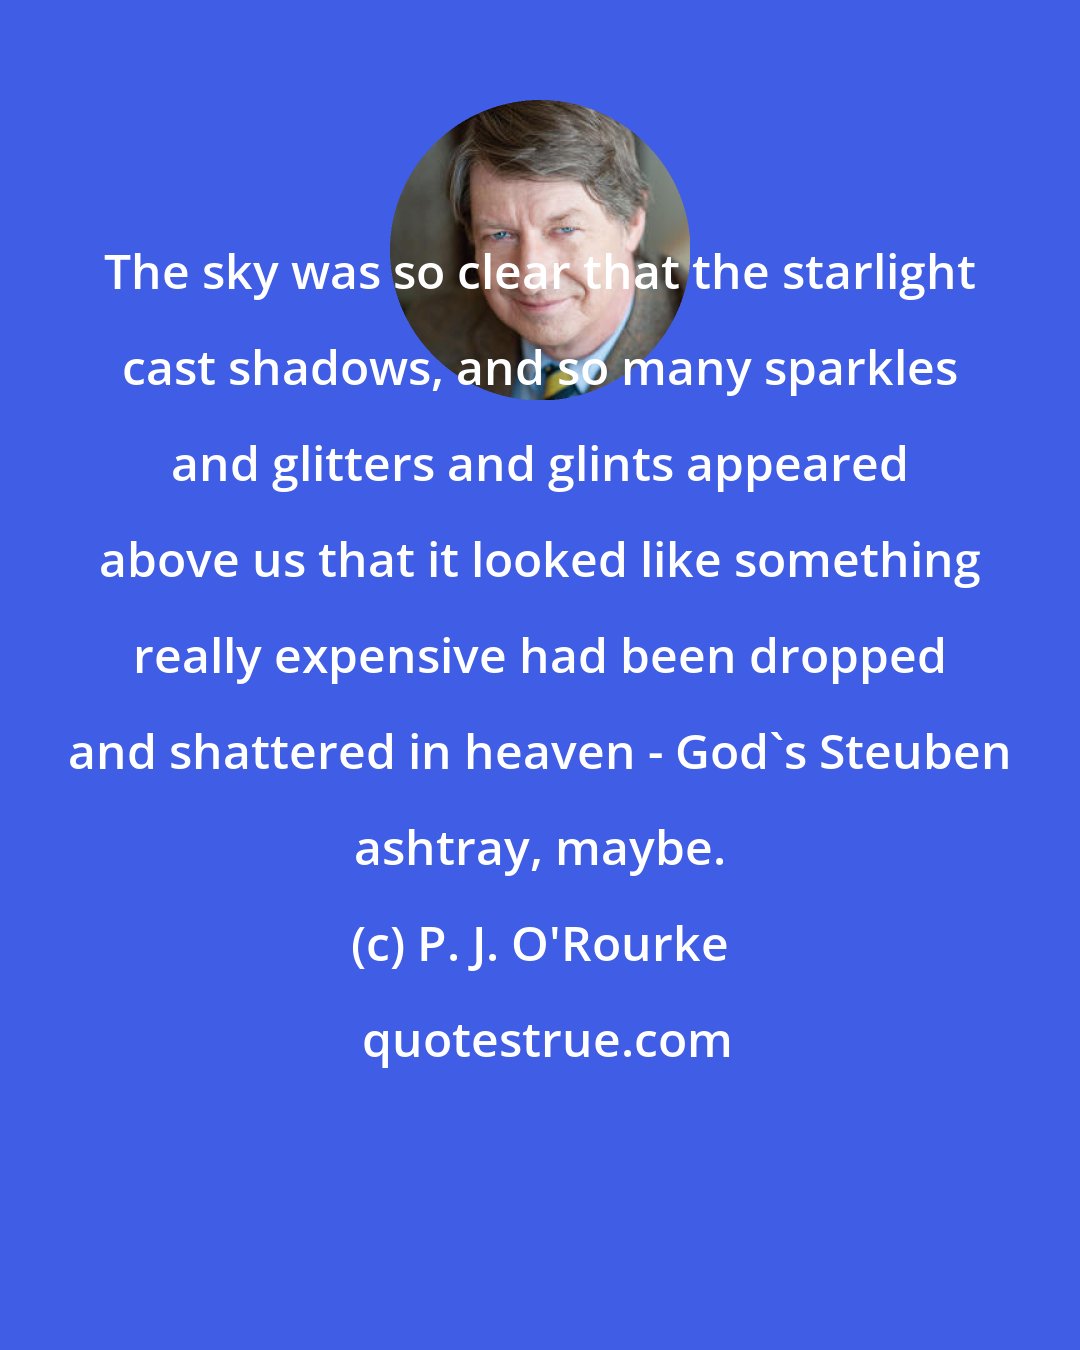 P. J. O'Rourke: The sky was so clear that the starlight cast shadows, and so many sparkles and glitters and glints appeared above us that it looked like something really expensive had been dropped and shattered in heaven - God's Steuben ashtray, maybe.